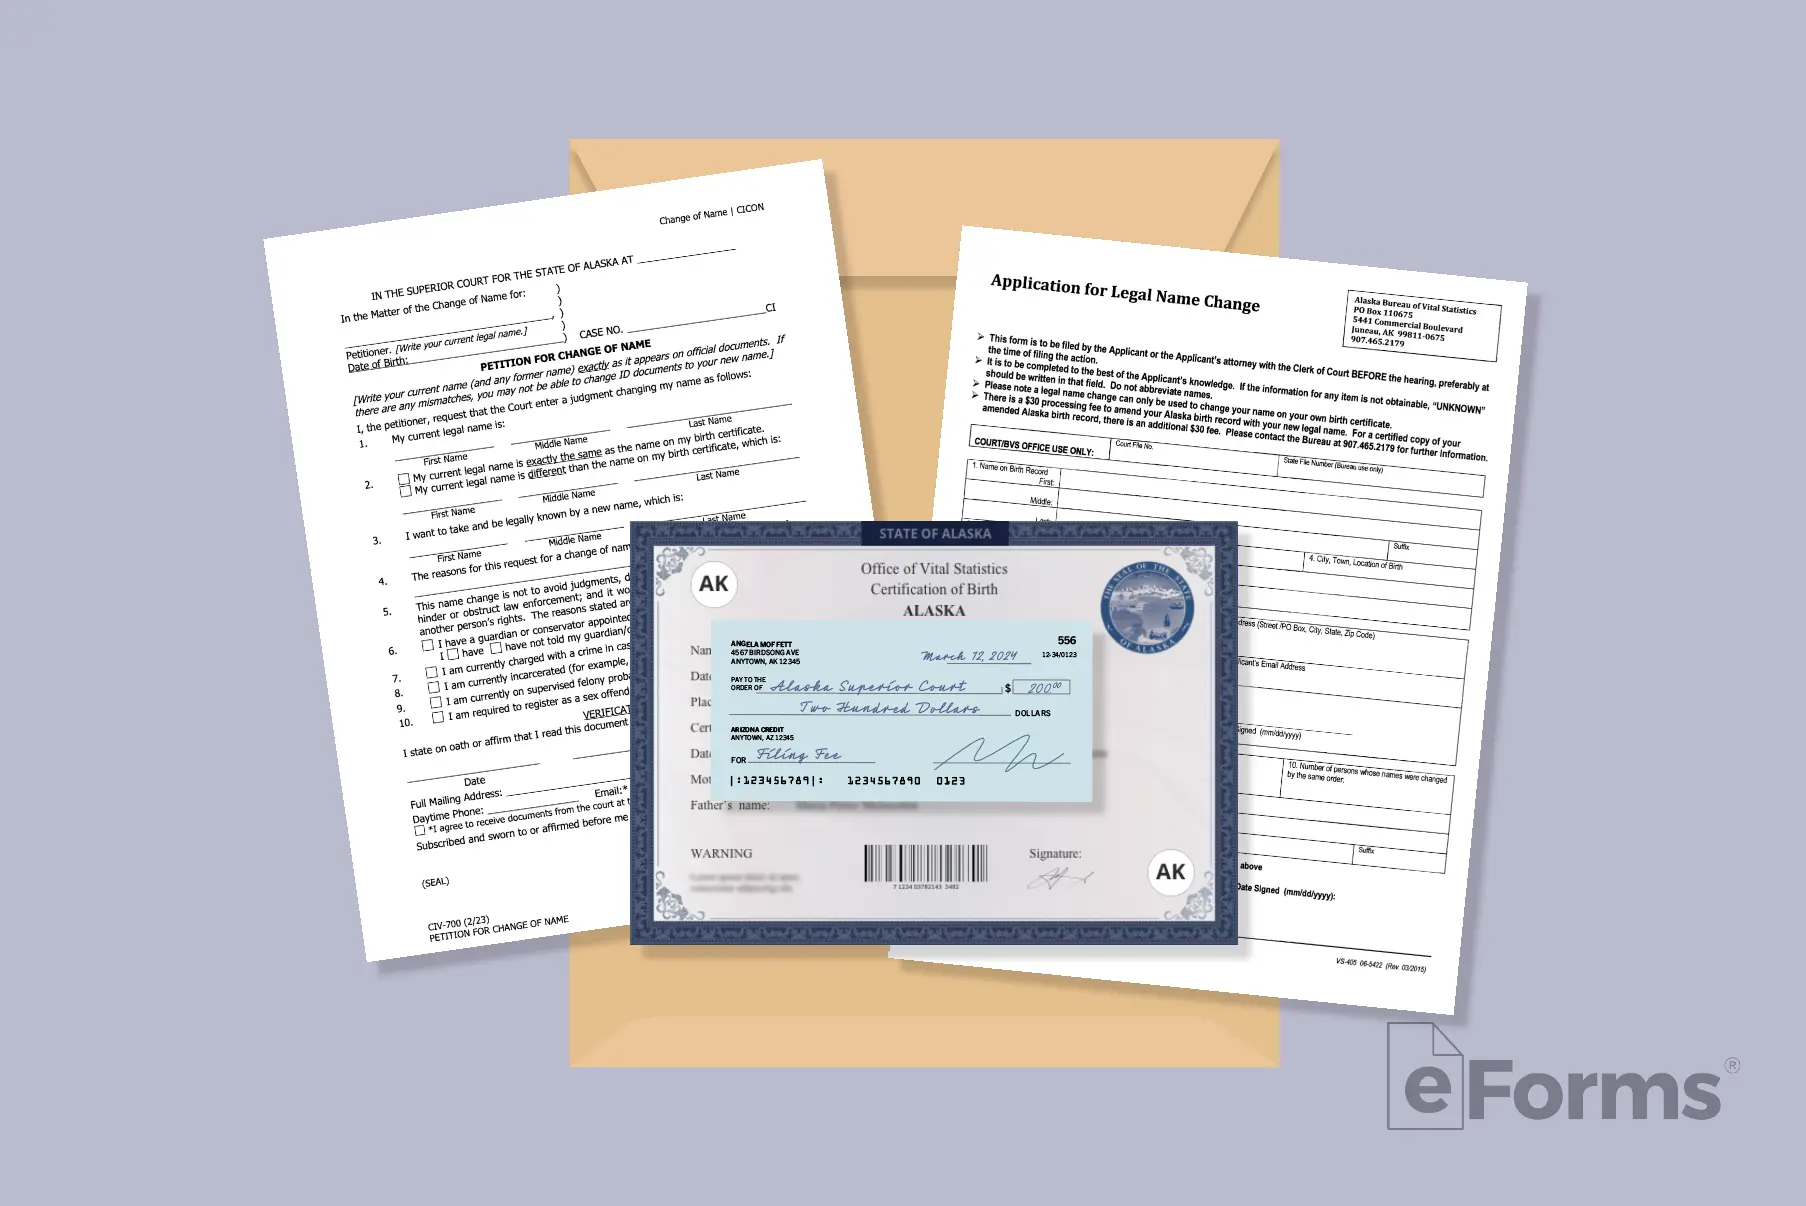 Flat lay image of required documents with a manila envelope.